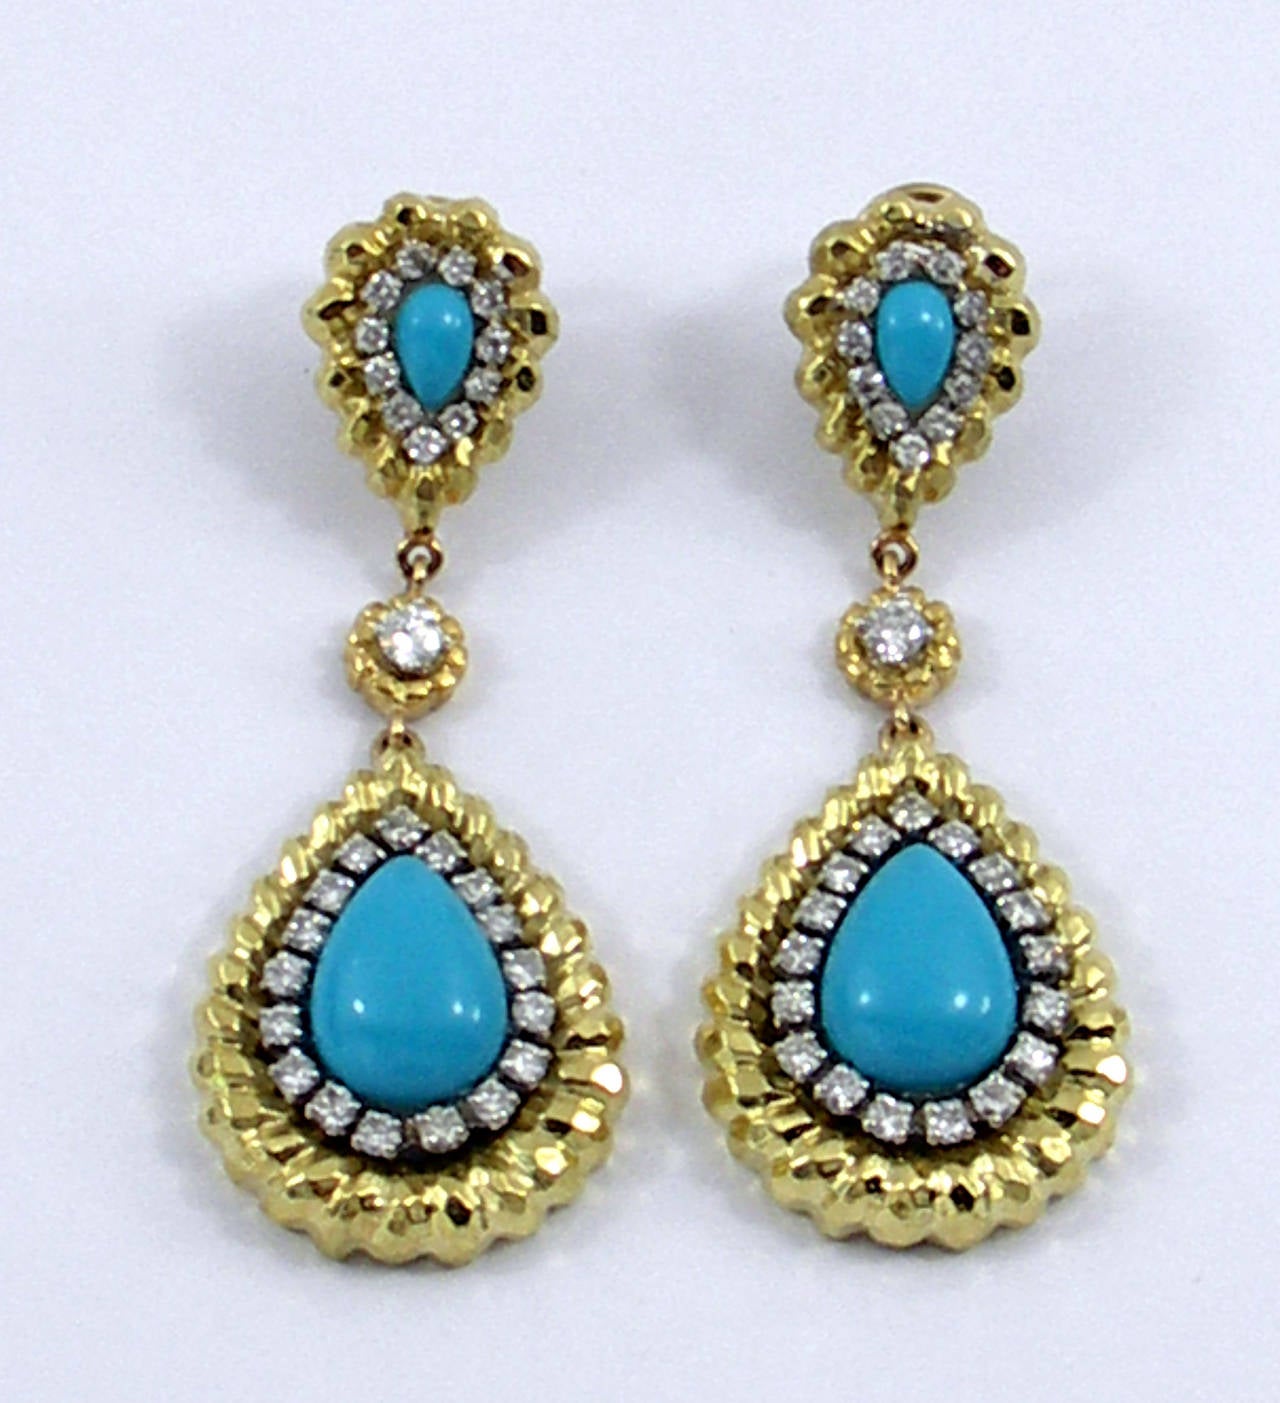 Turquoise Diamond Gold Drop Earrings For Sale at 1stdibs